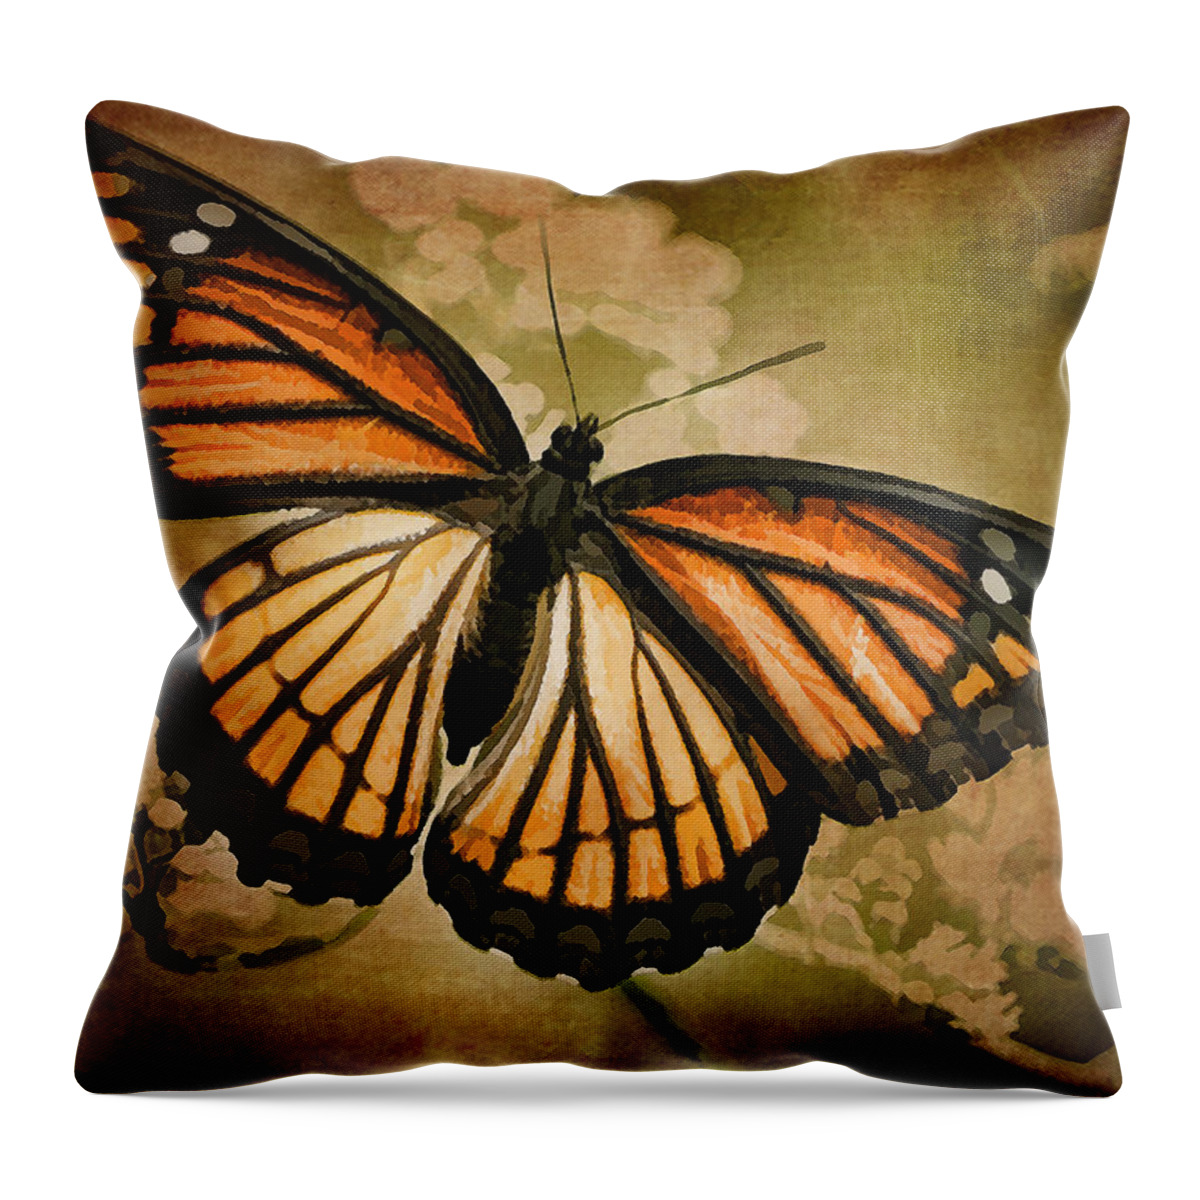 Monarch Butterfly Throw Pillow featuring the photograph Painted Monarch Butterfly by Kathy Clark